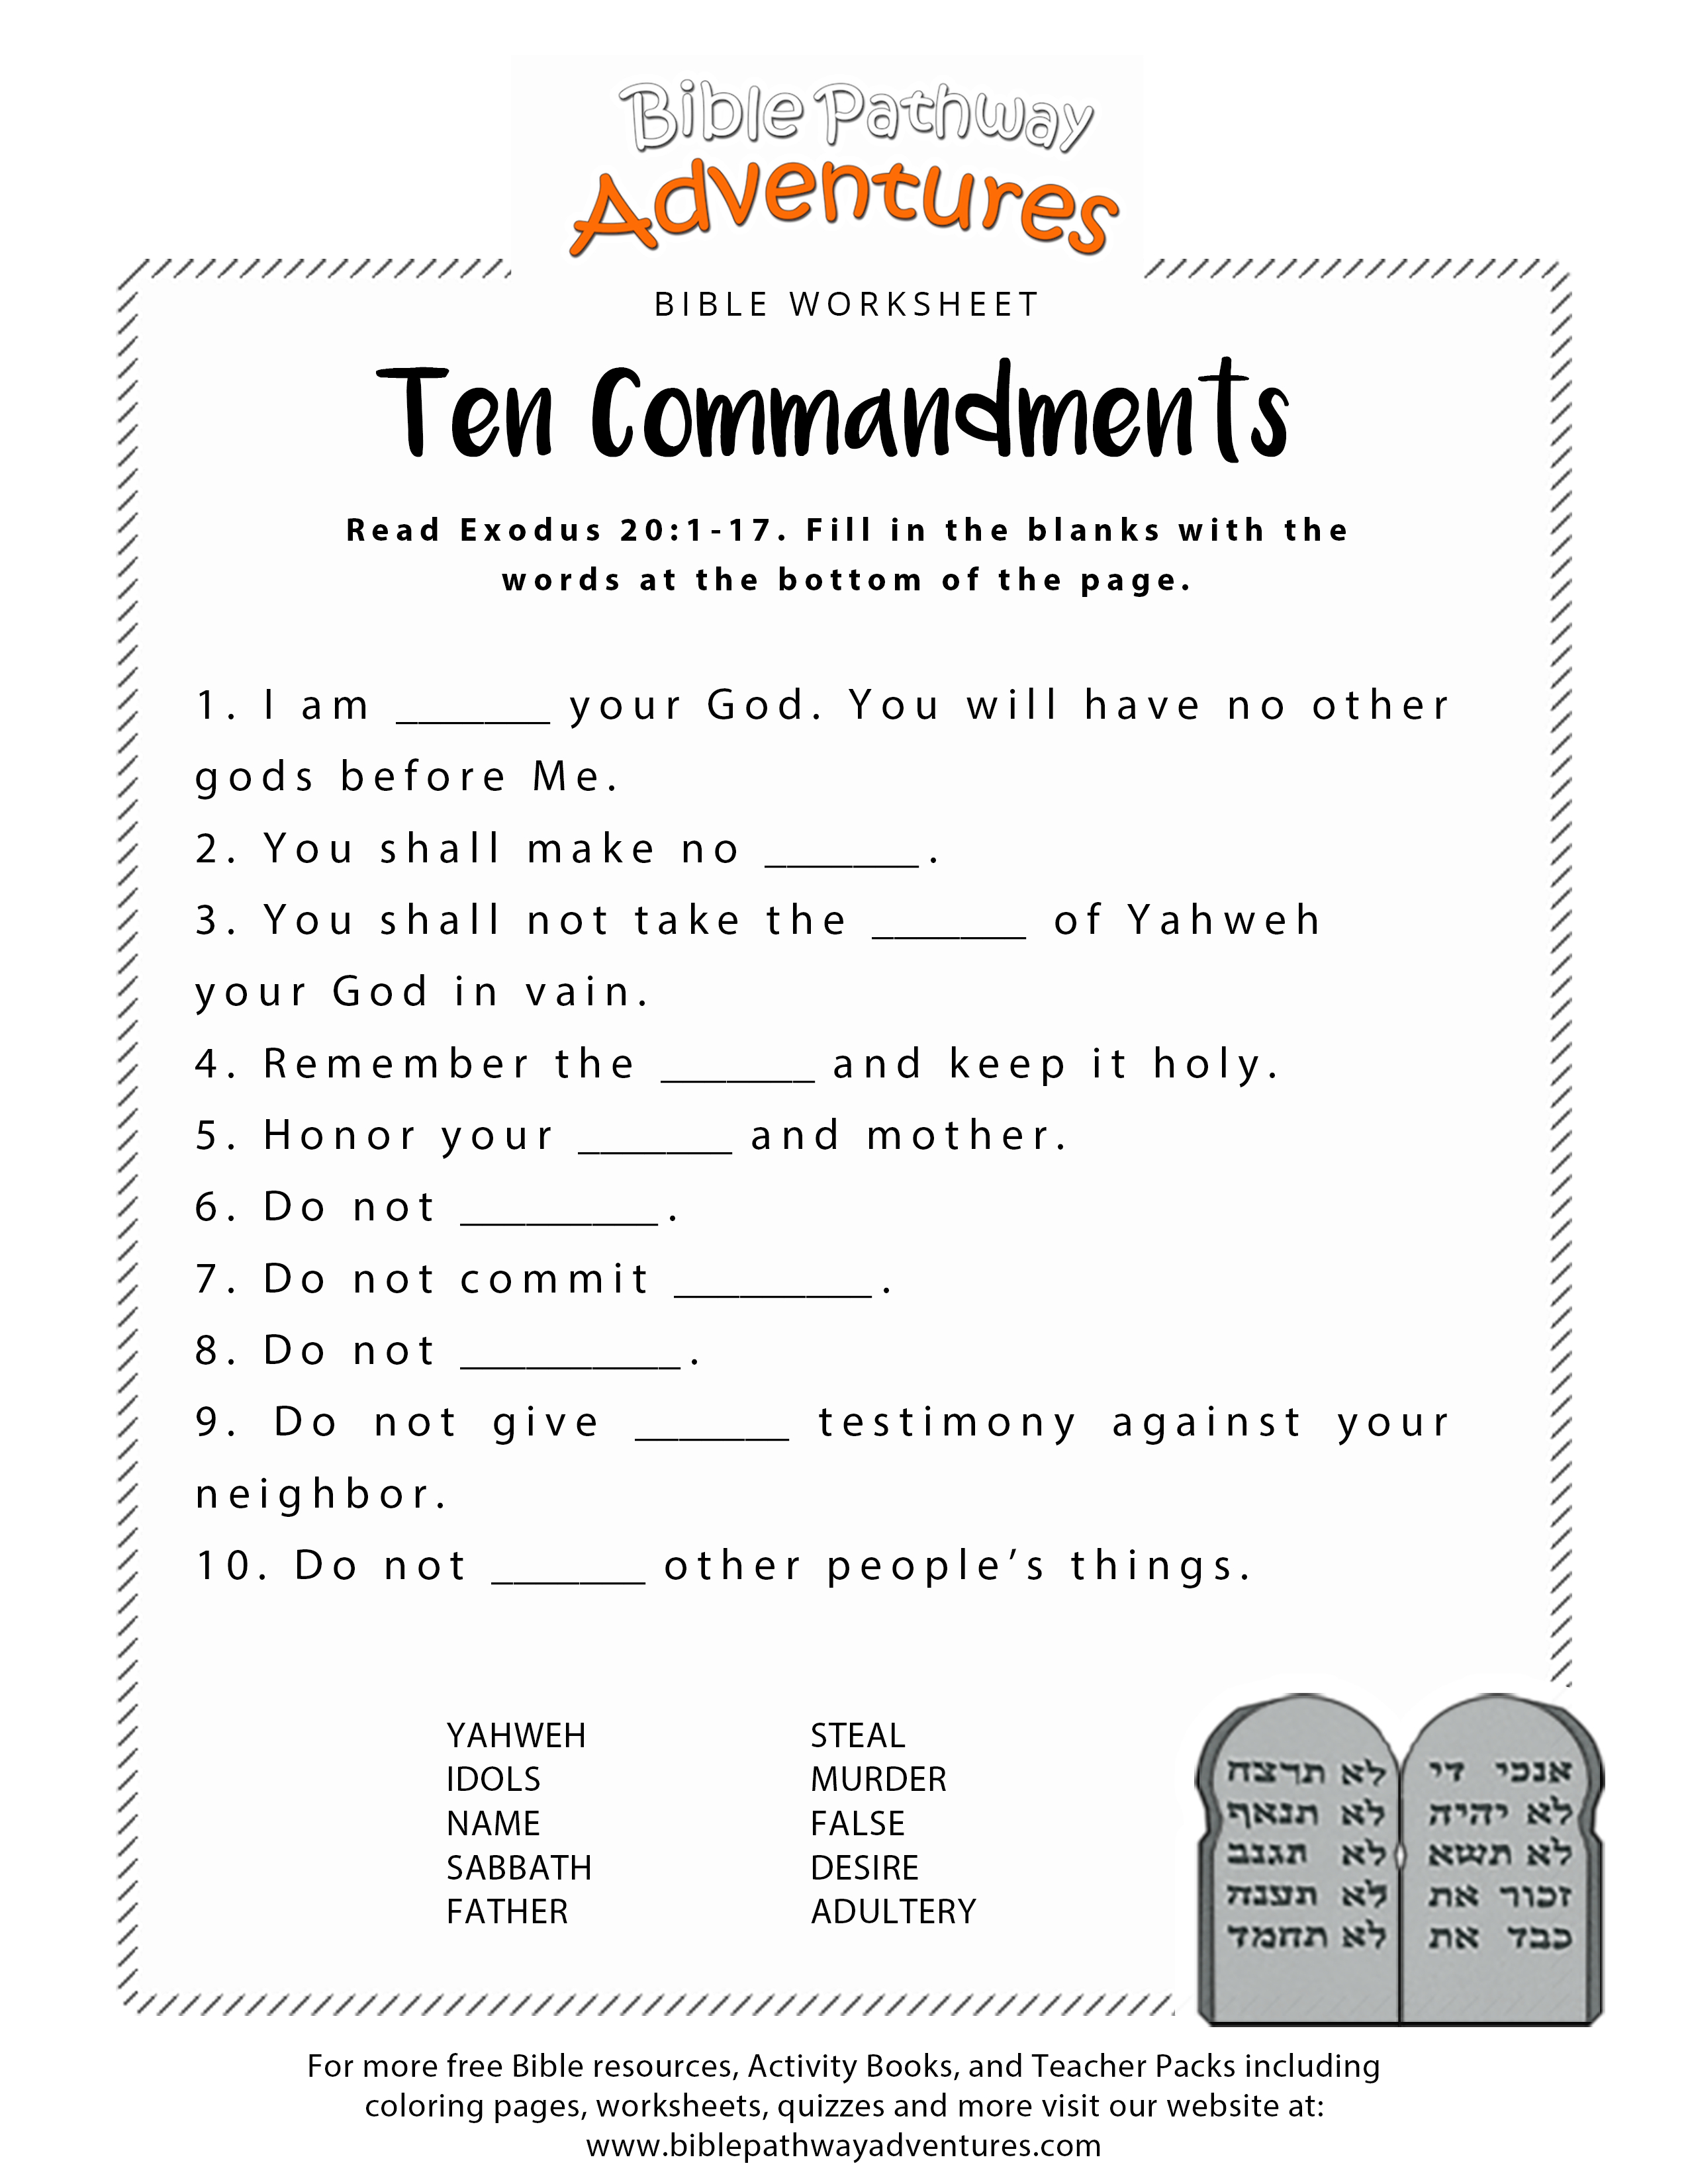 Free Printable Bible Worksheets For Youth – Worksheet Template | Books Of The Bible Printable Worksheets